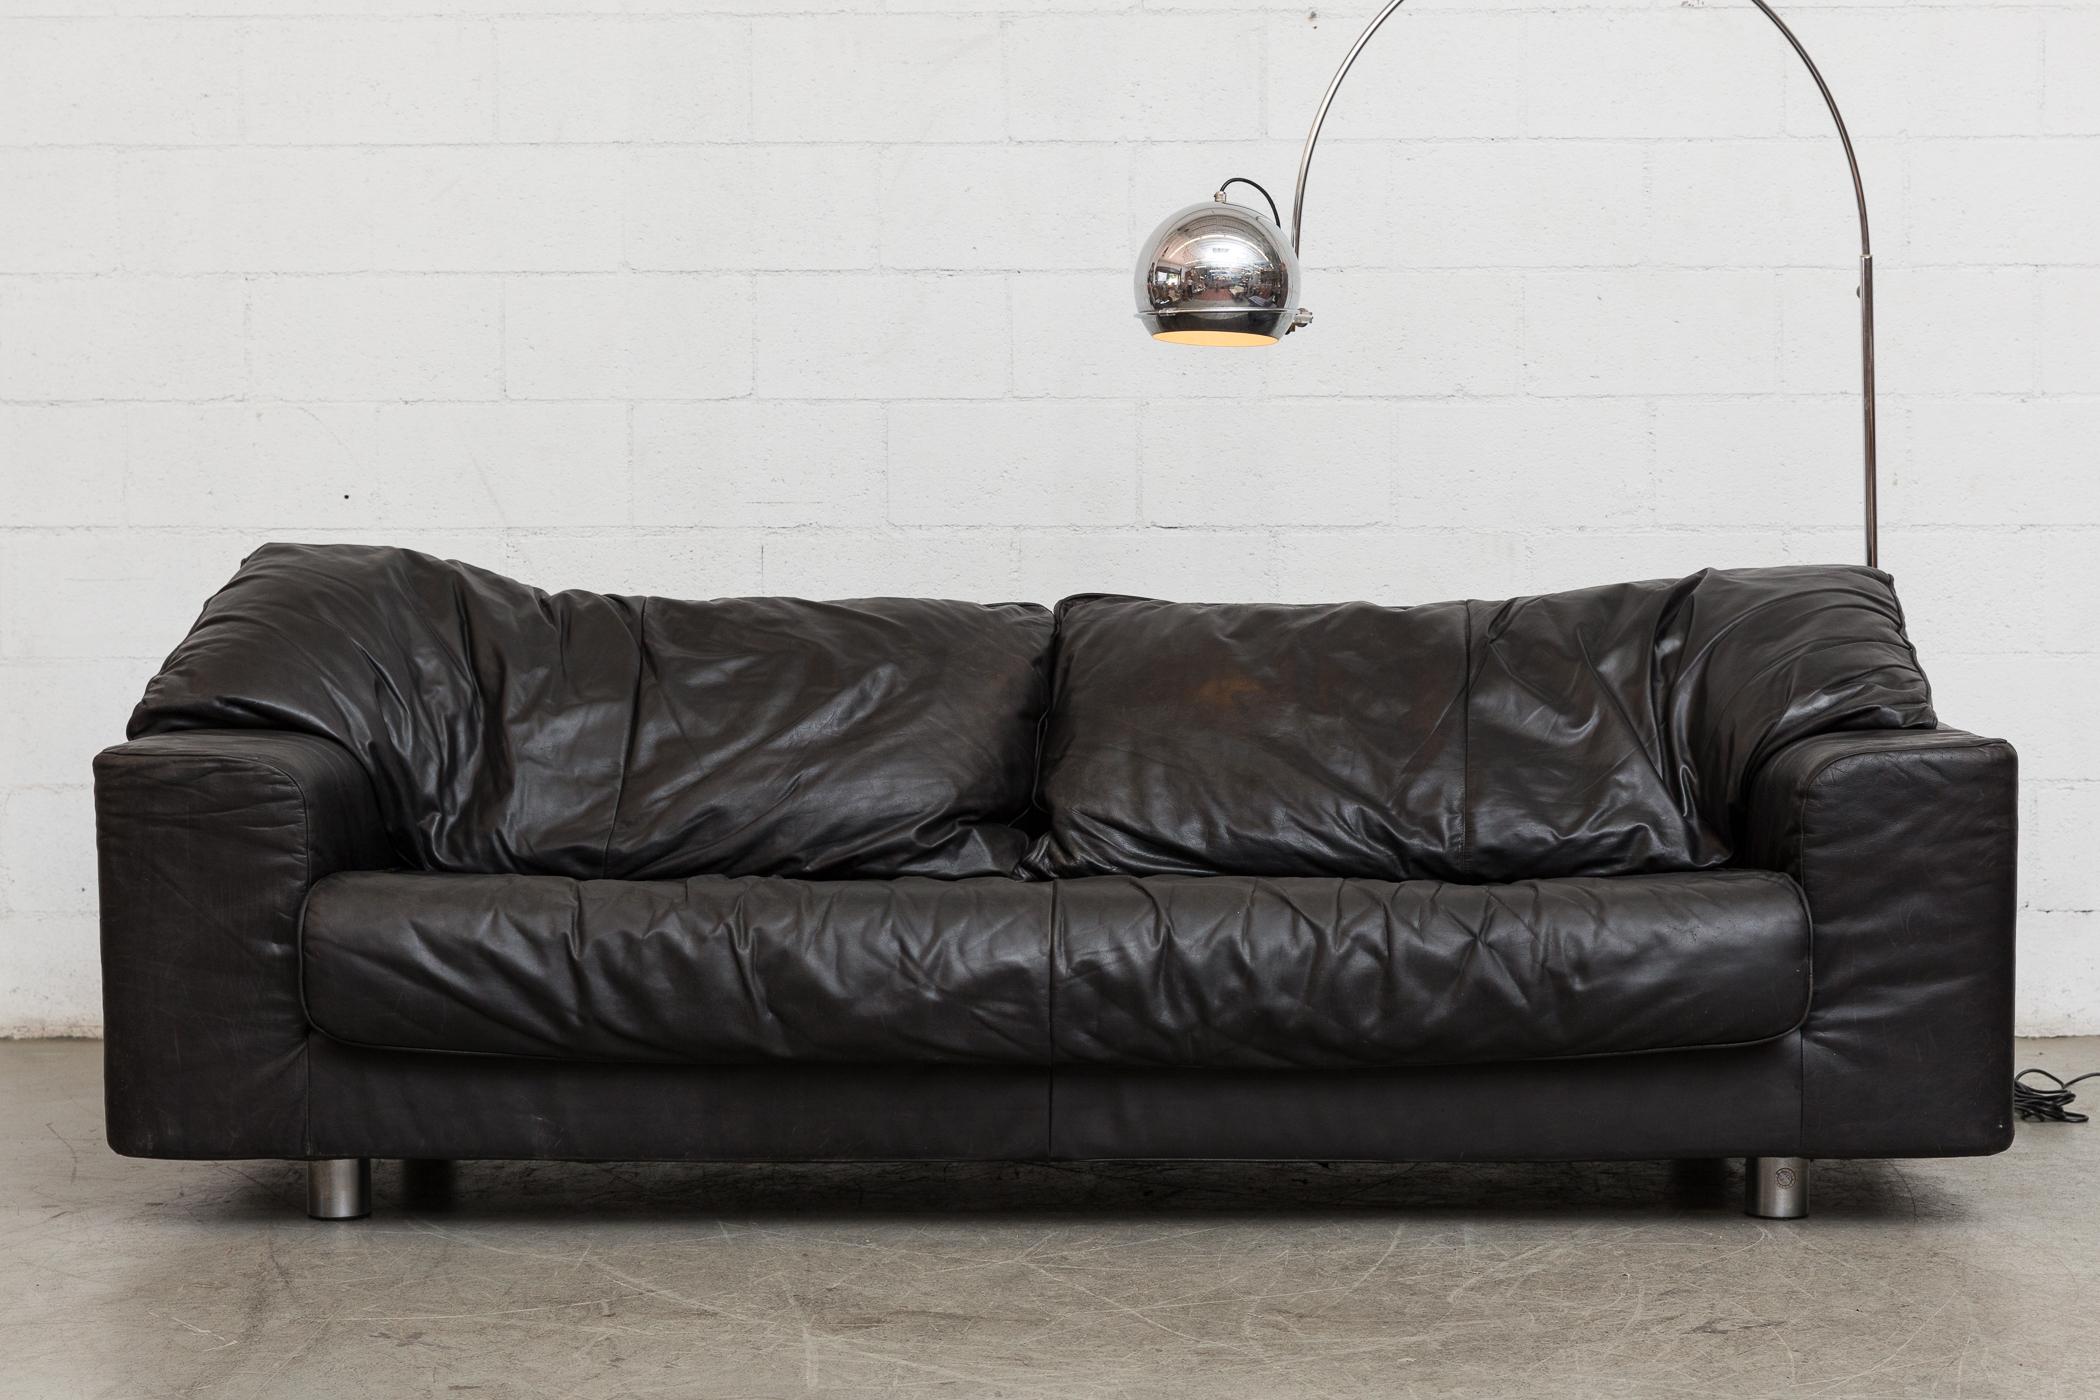 Large comfy midcentury three-seat sofa in black leather. Designed by Gerard Van Den Berg for Montis. Zip on back cushions four short chrome legs. Original manufacturer tag photographed. Good original condition. Set price.